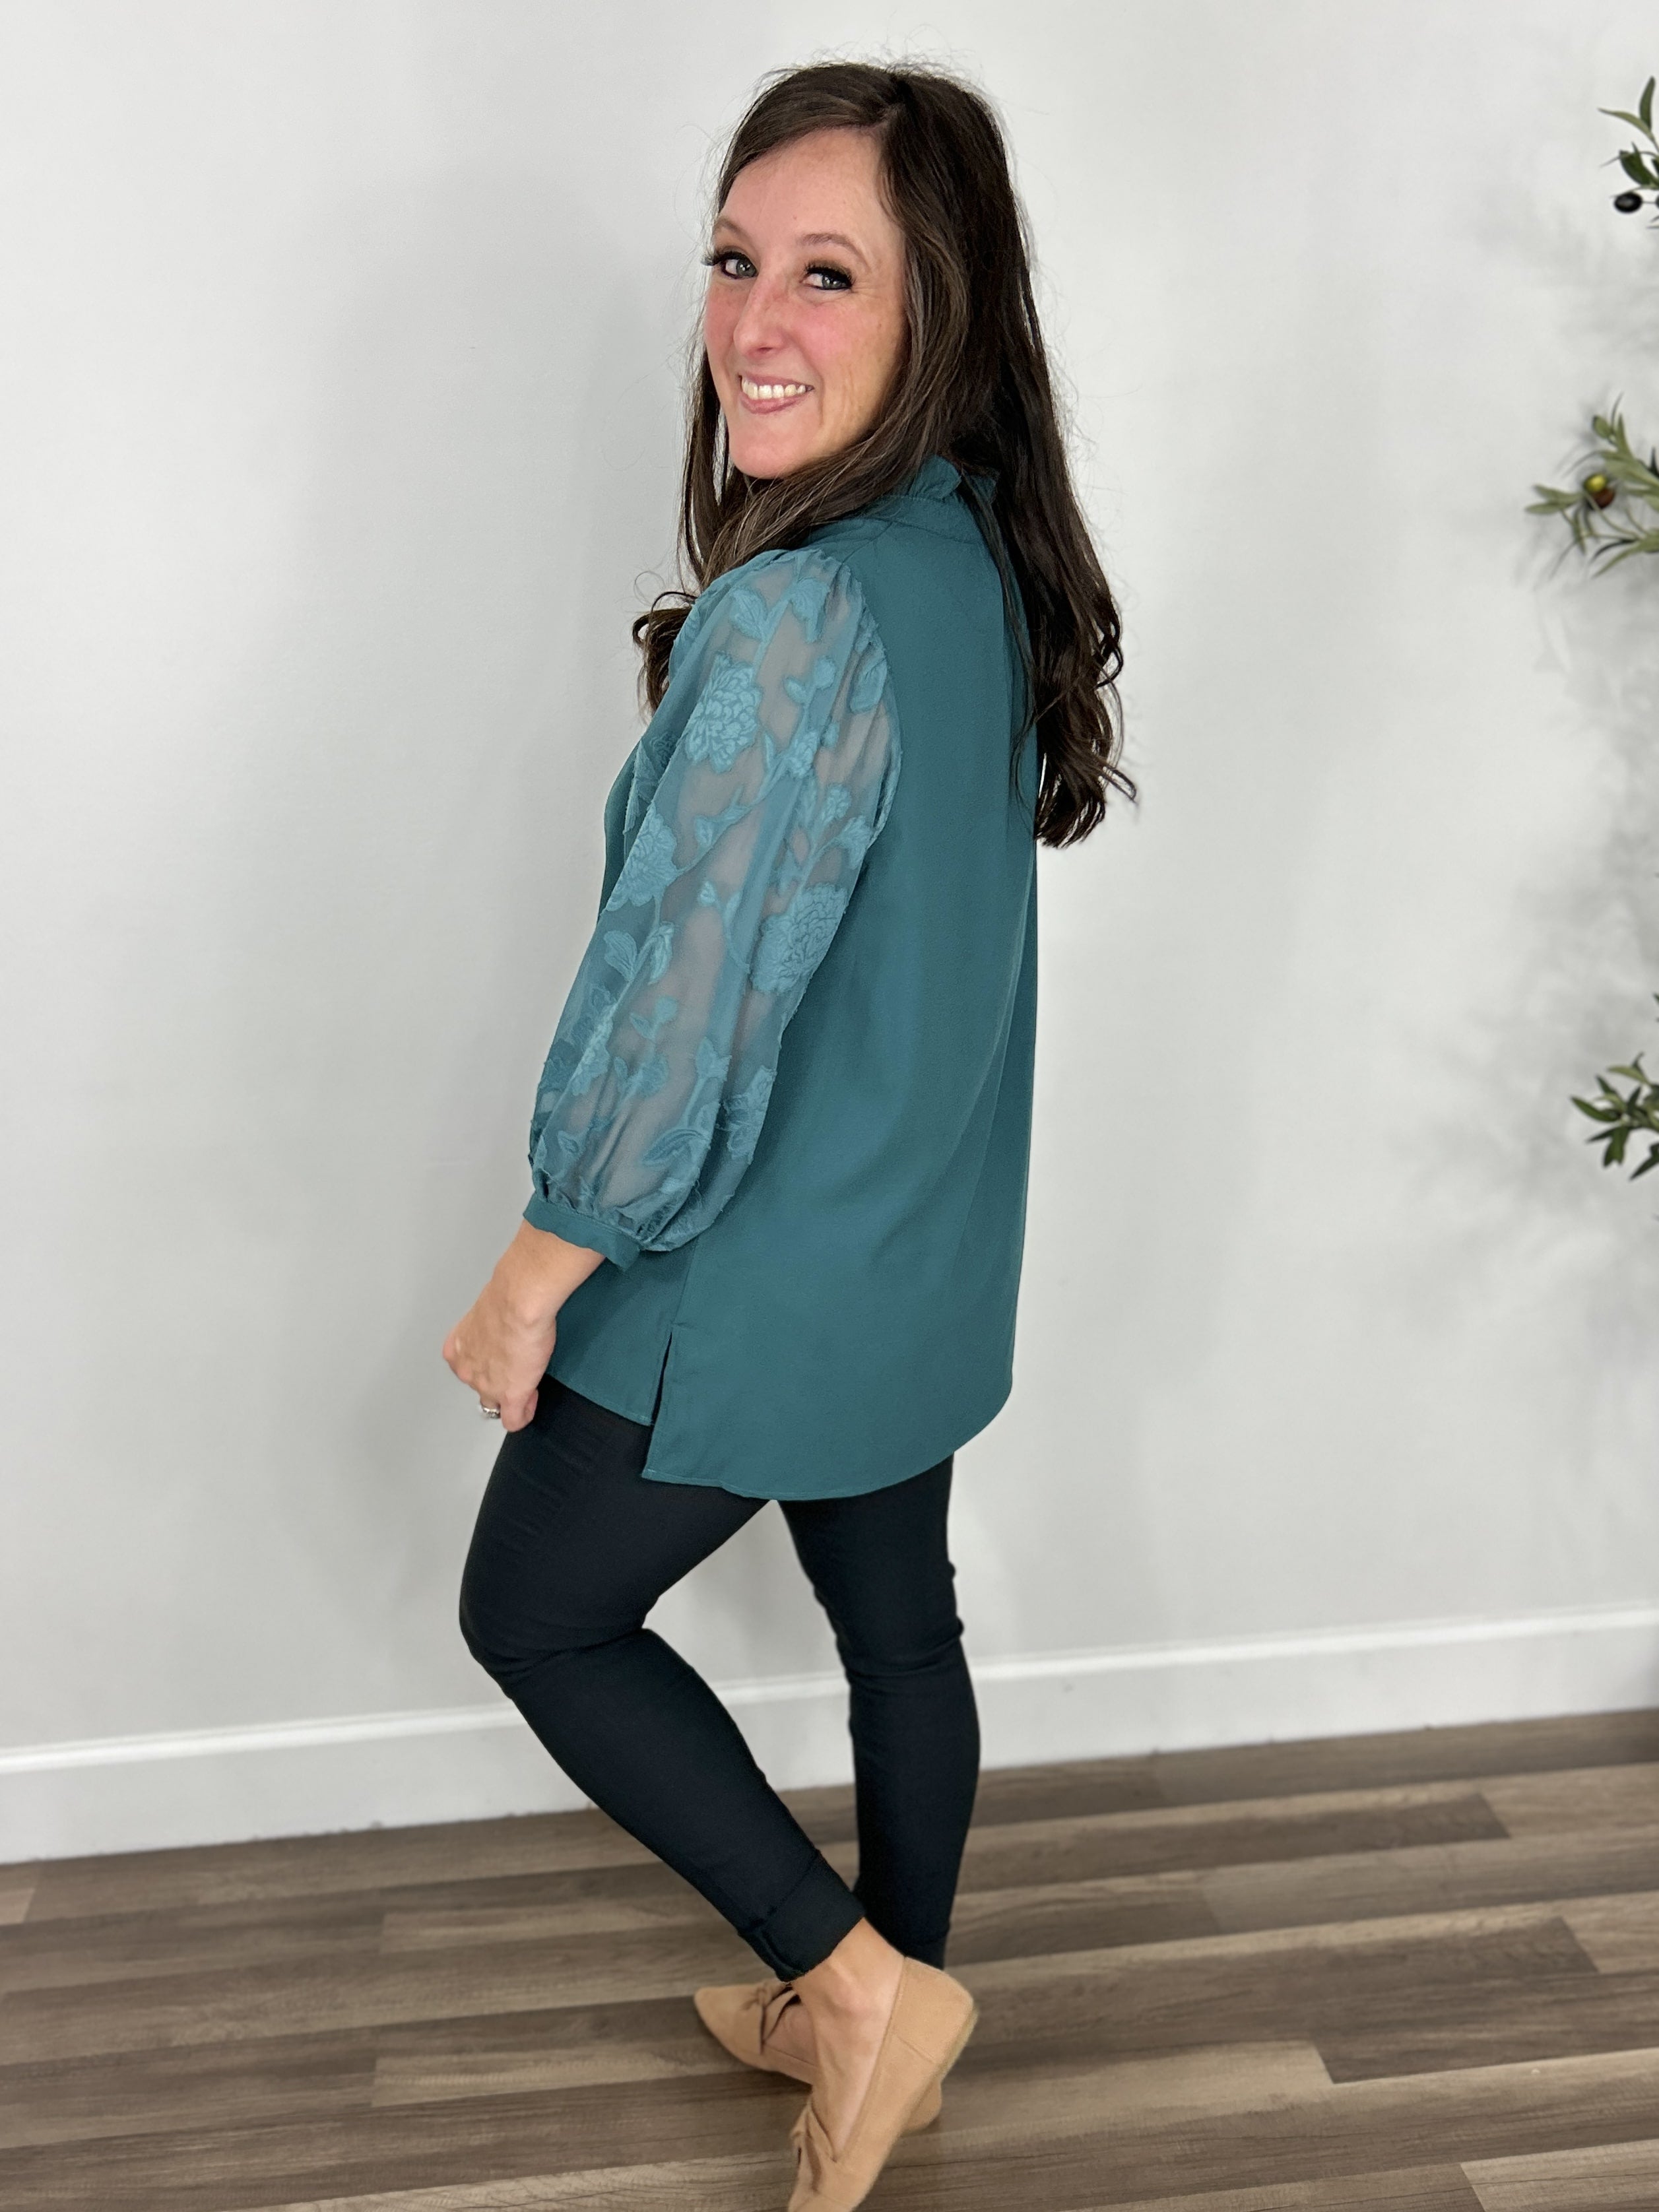 Teal women's three quarter sleeve top side view paired with skinny pants and flat shoes.